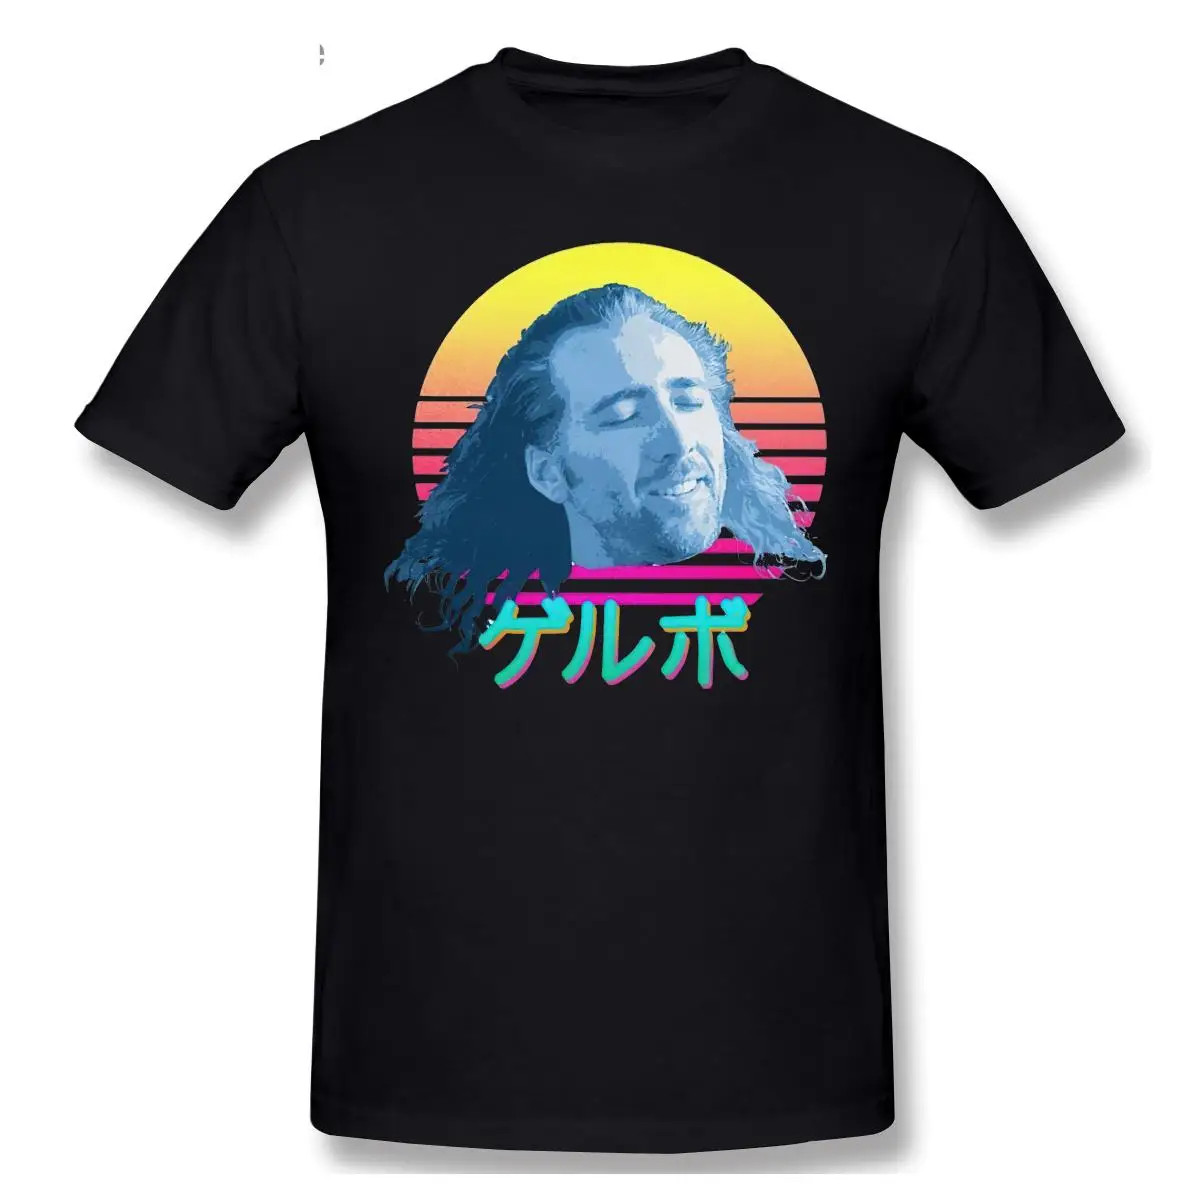 

Funny Nicolas Cage Meme T Shirt For Men Soft Cotton Tshirt Casual T-shirt Short Sleeves Vaporwave Tee Tops Fitted Apparel Merch